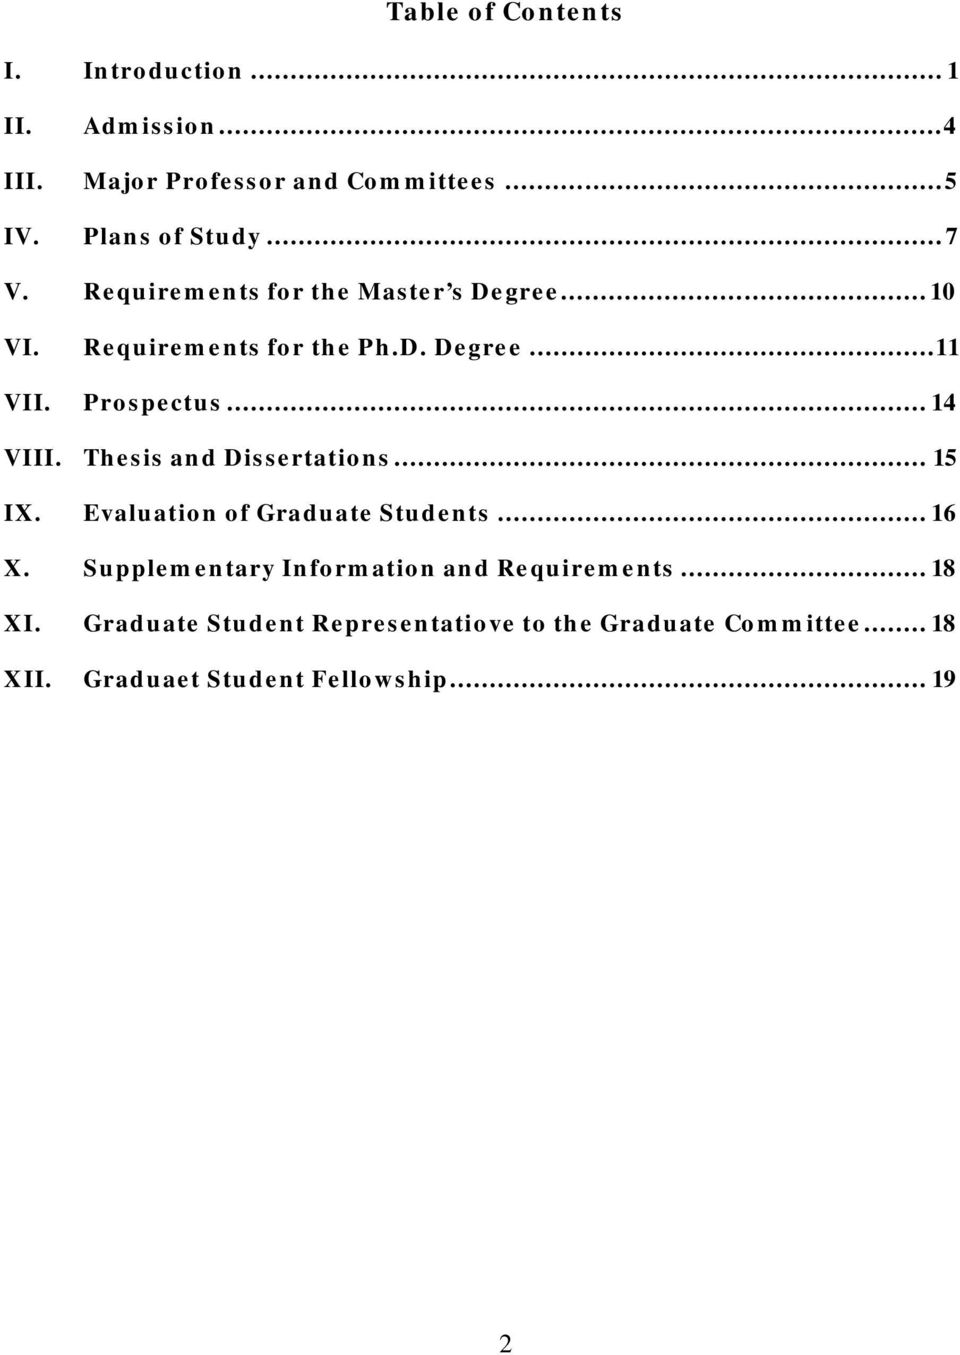 Thesis and Dissertations... 15 IX. Evaluation of Graduate Students... 16 X. Supplementary Information and Requirements.